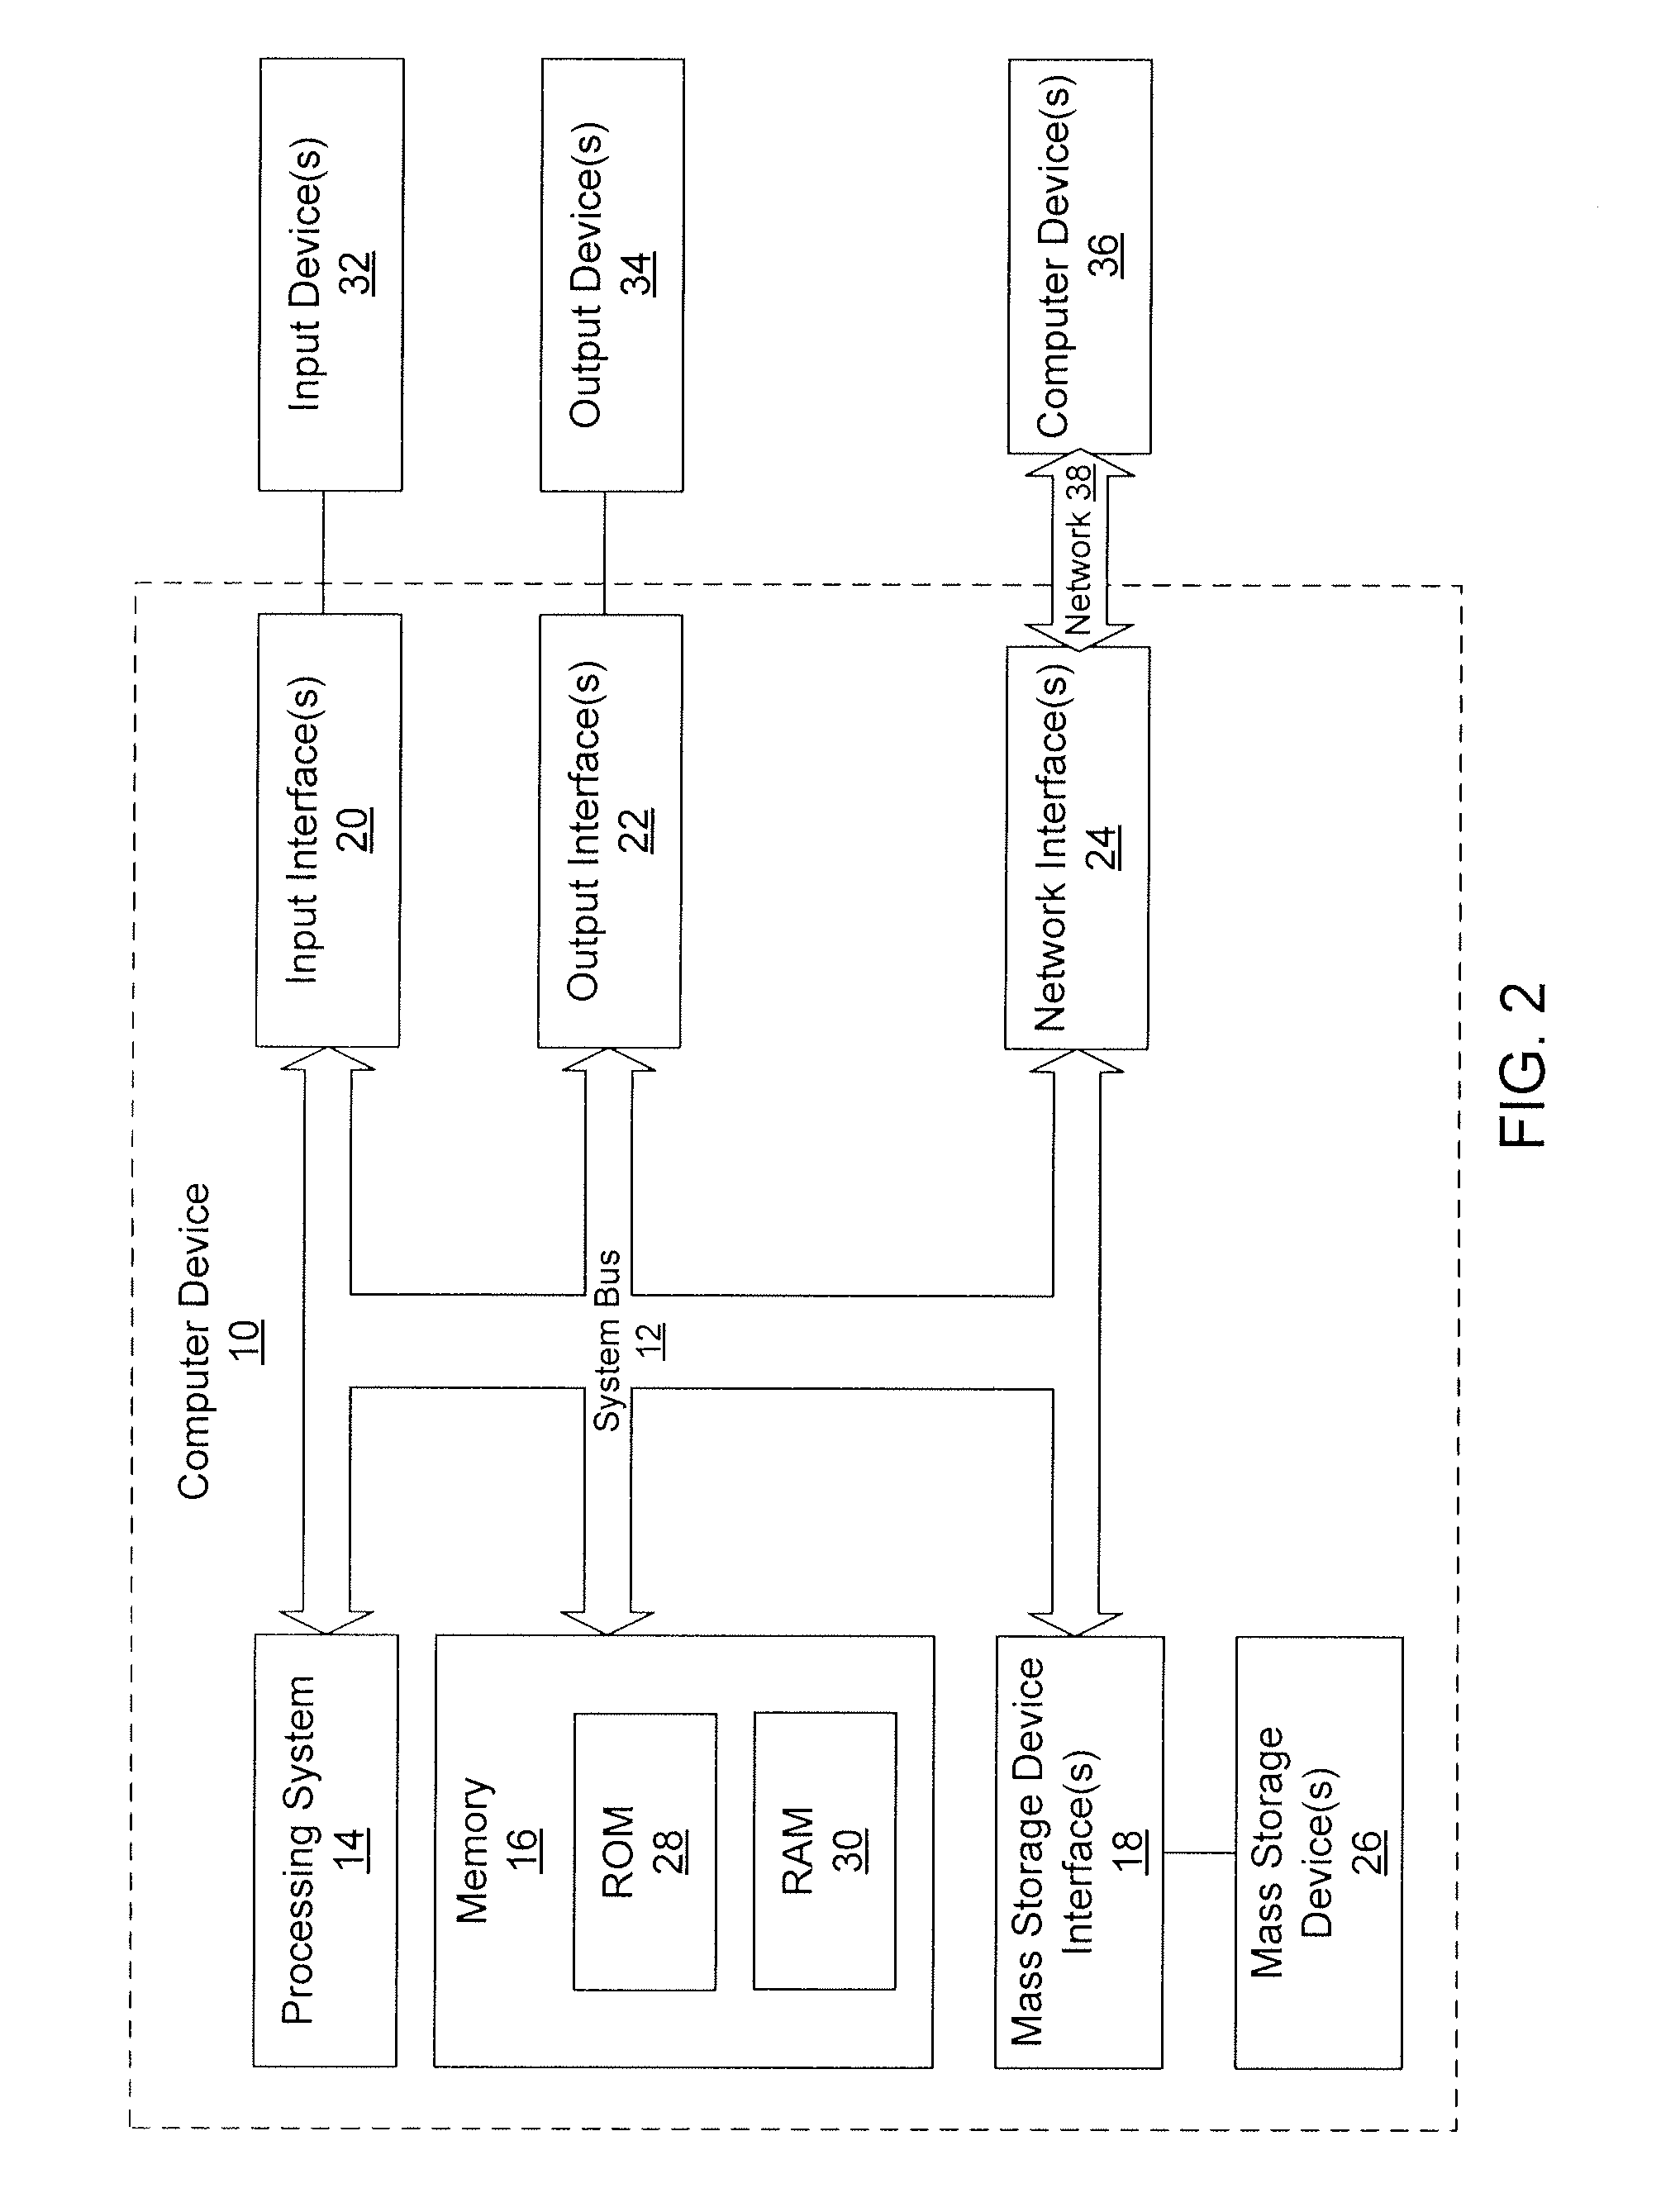 Systems and methods for authenticating an individual